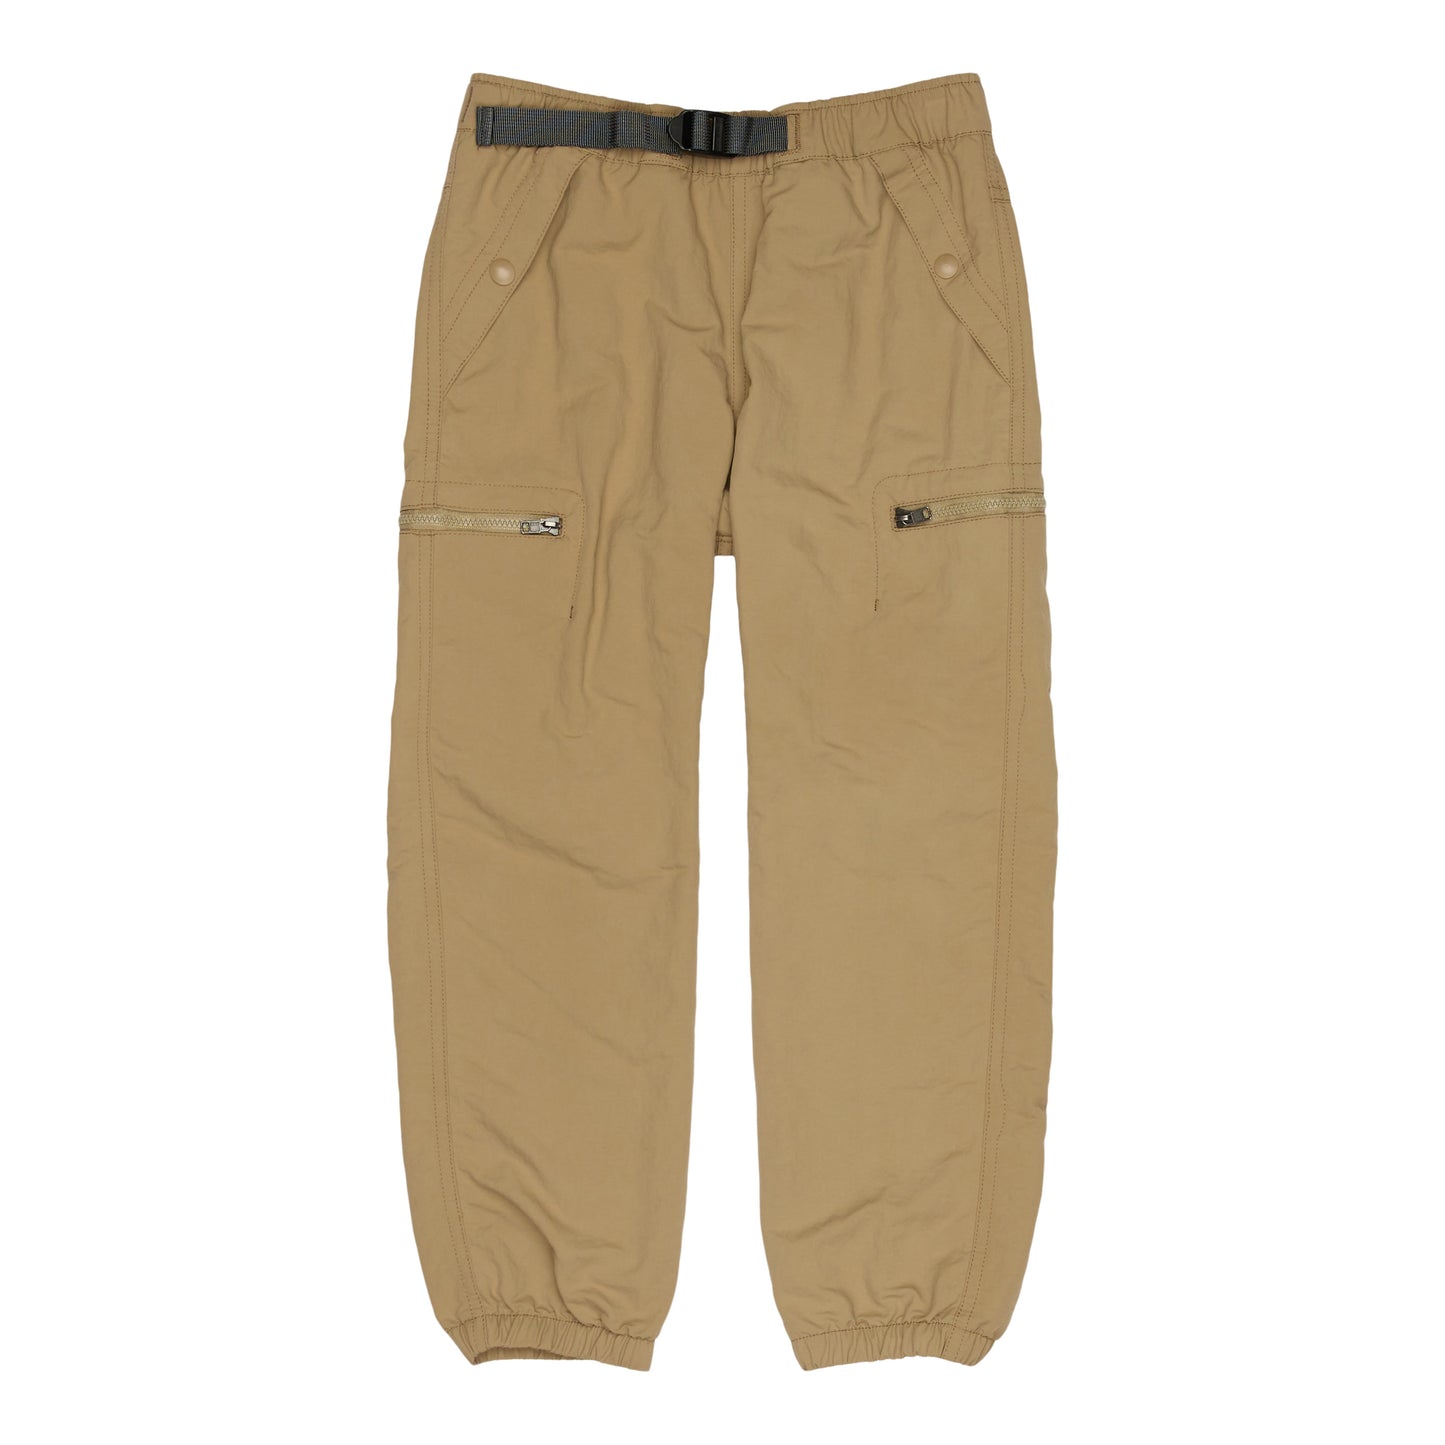 Boys' Outdoor Everyday Pants